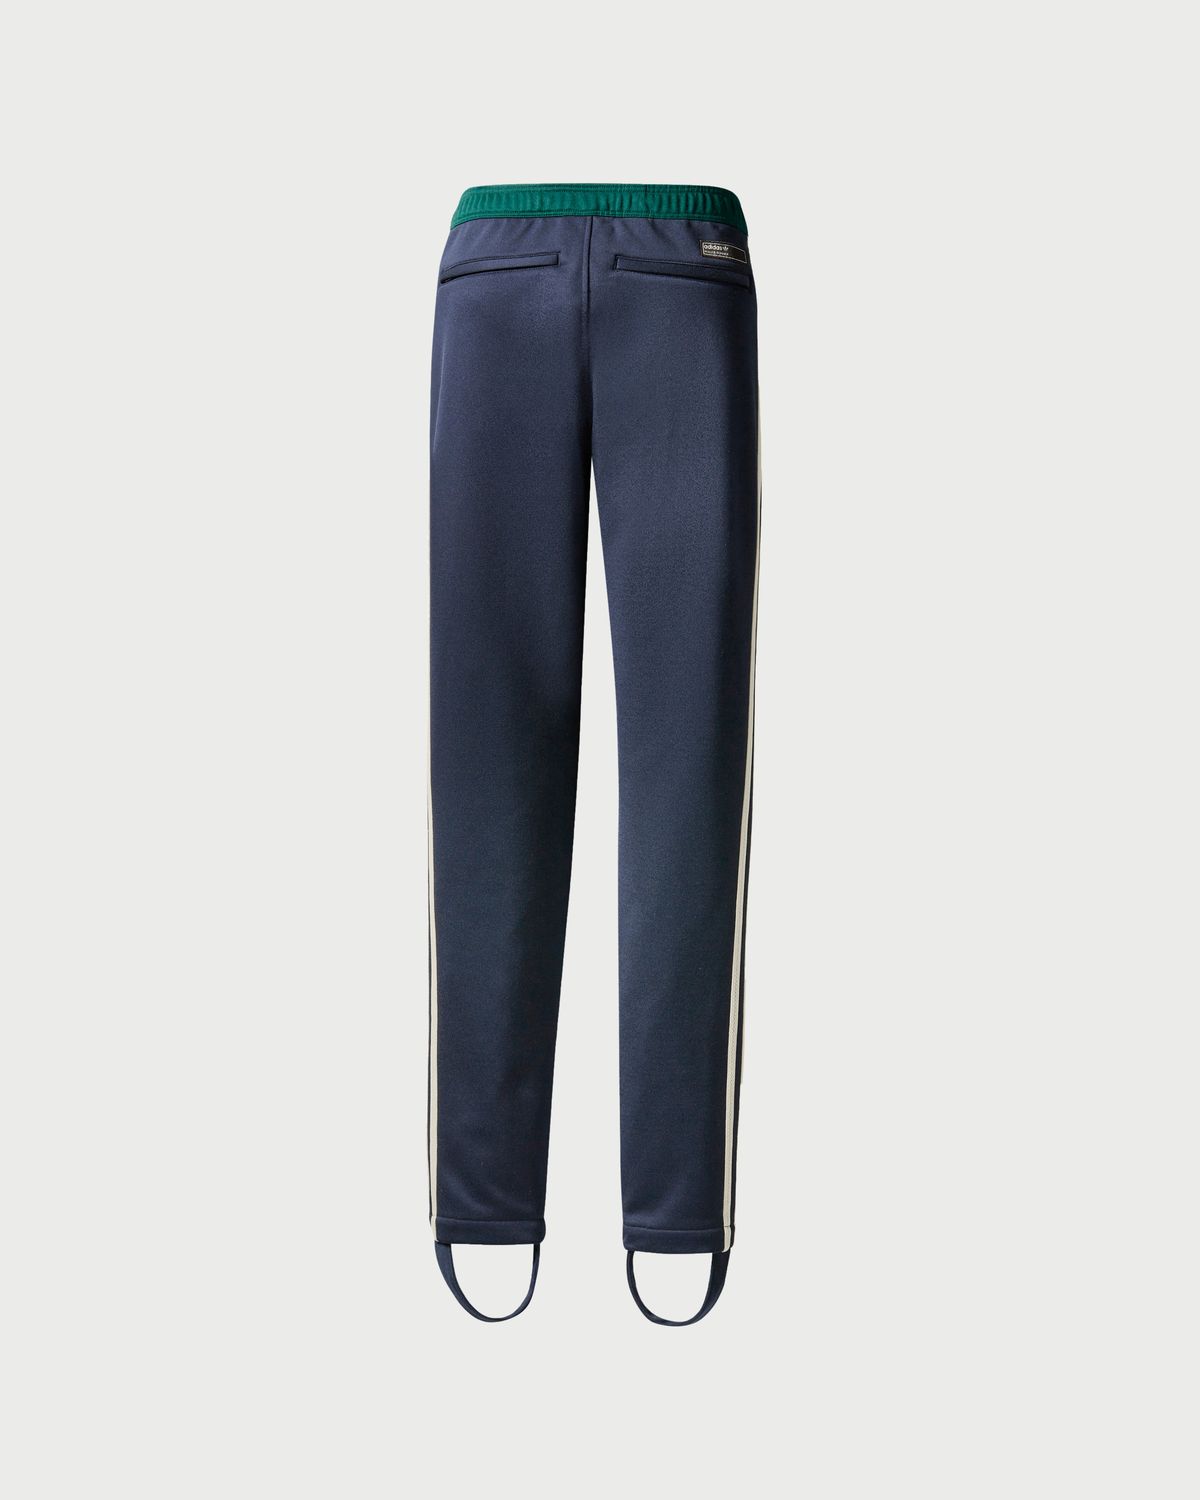 Adidas x Wales Bonner – Lovers Trousers Navy - Track Pants - Blue - Image 2